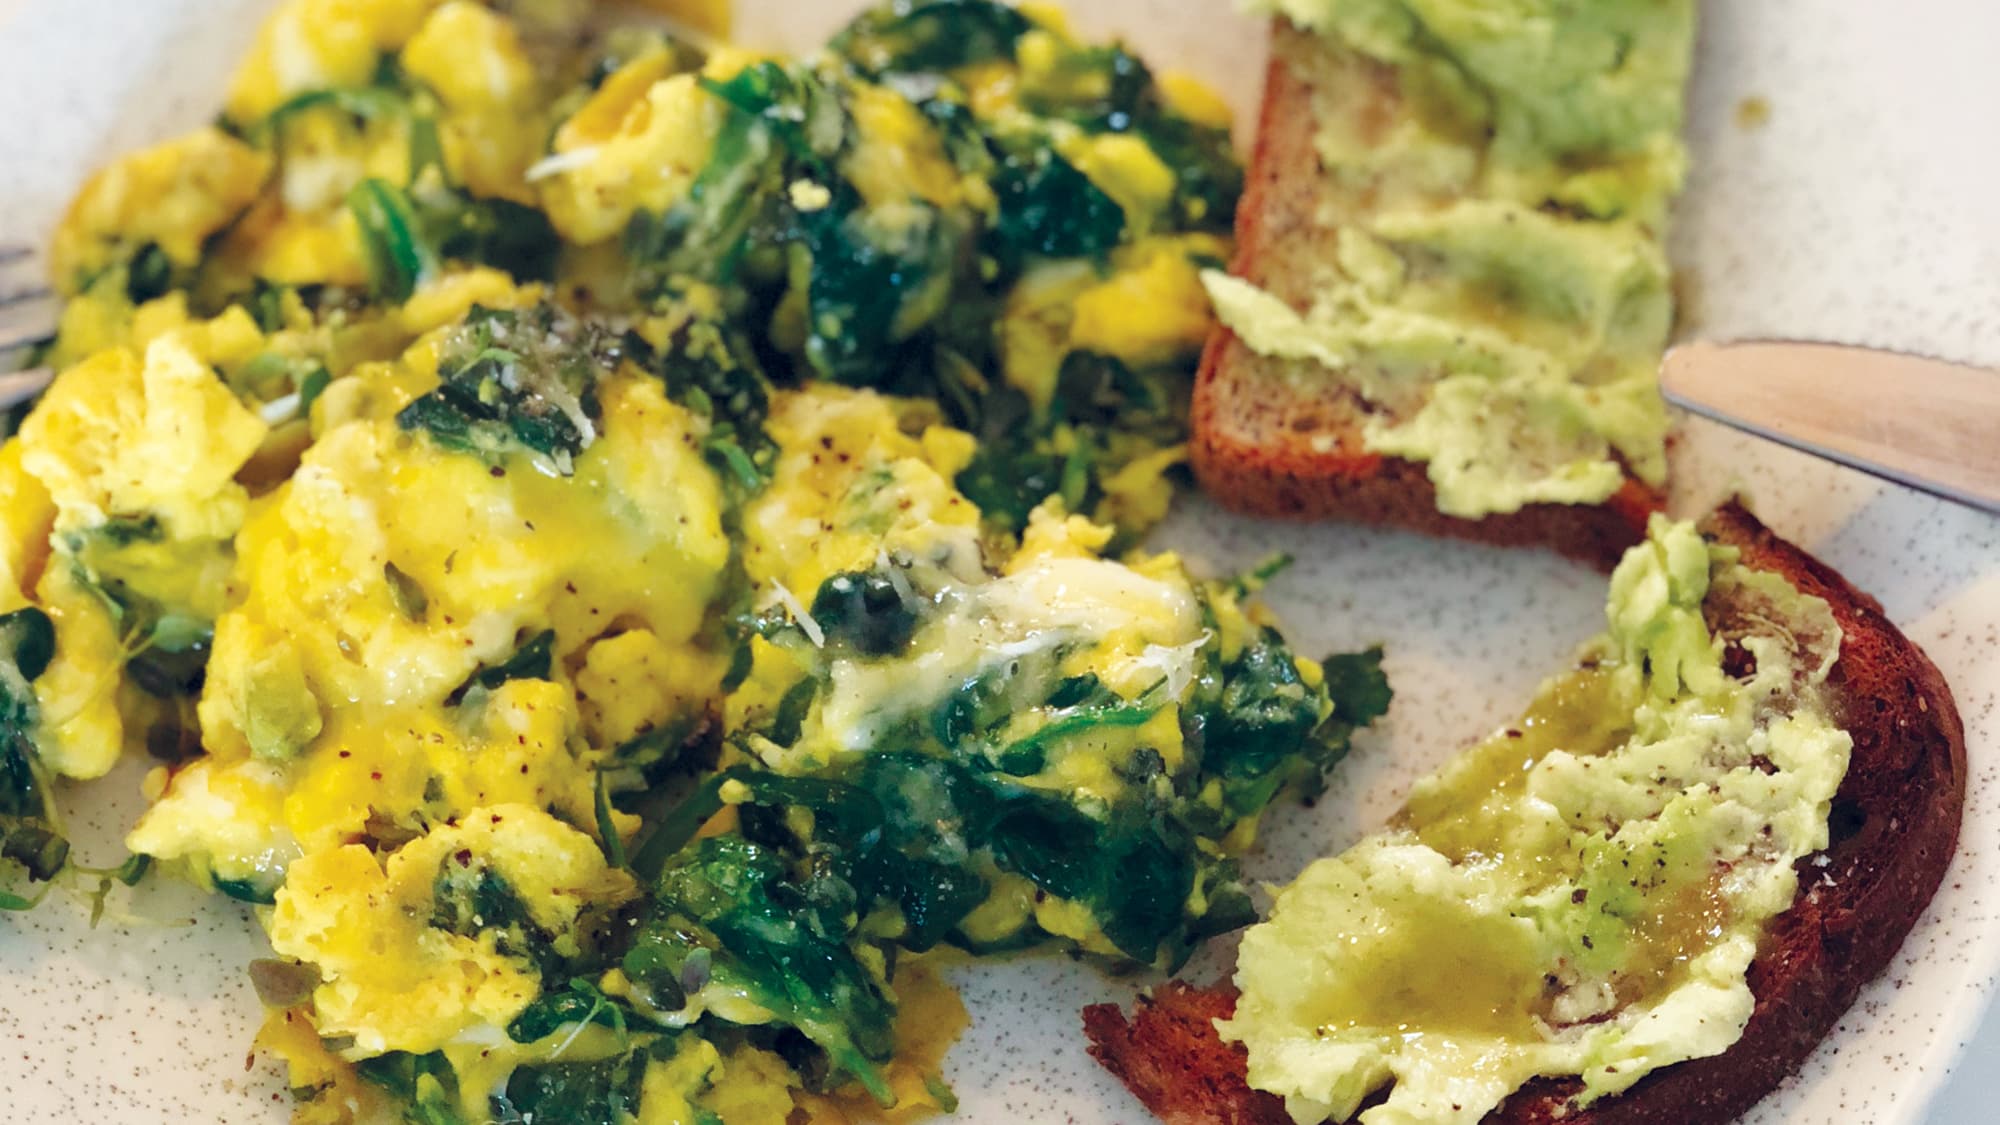 Green eggs with avocado - Healthy Food Guide